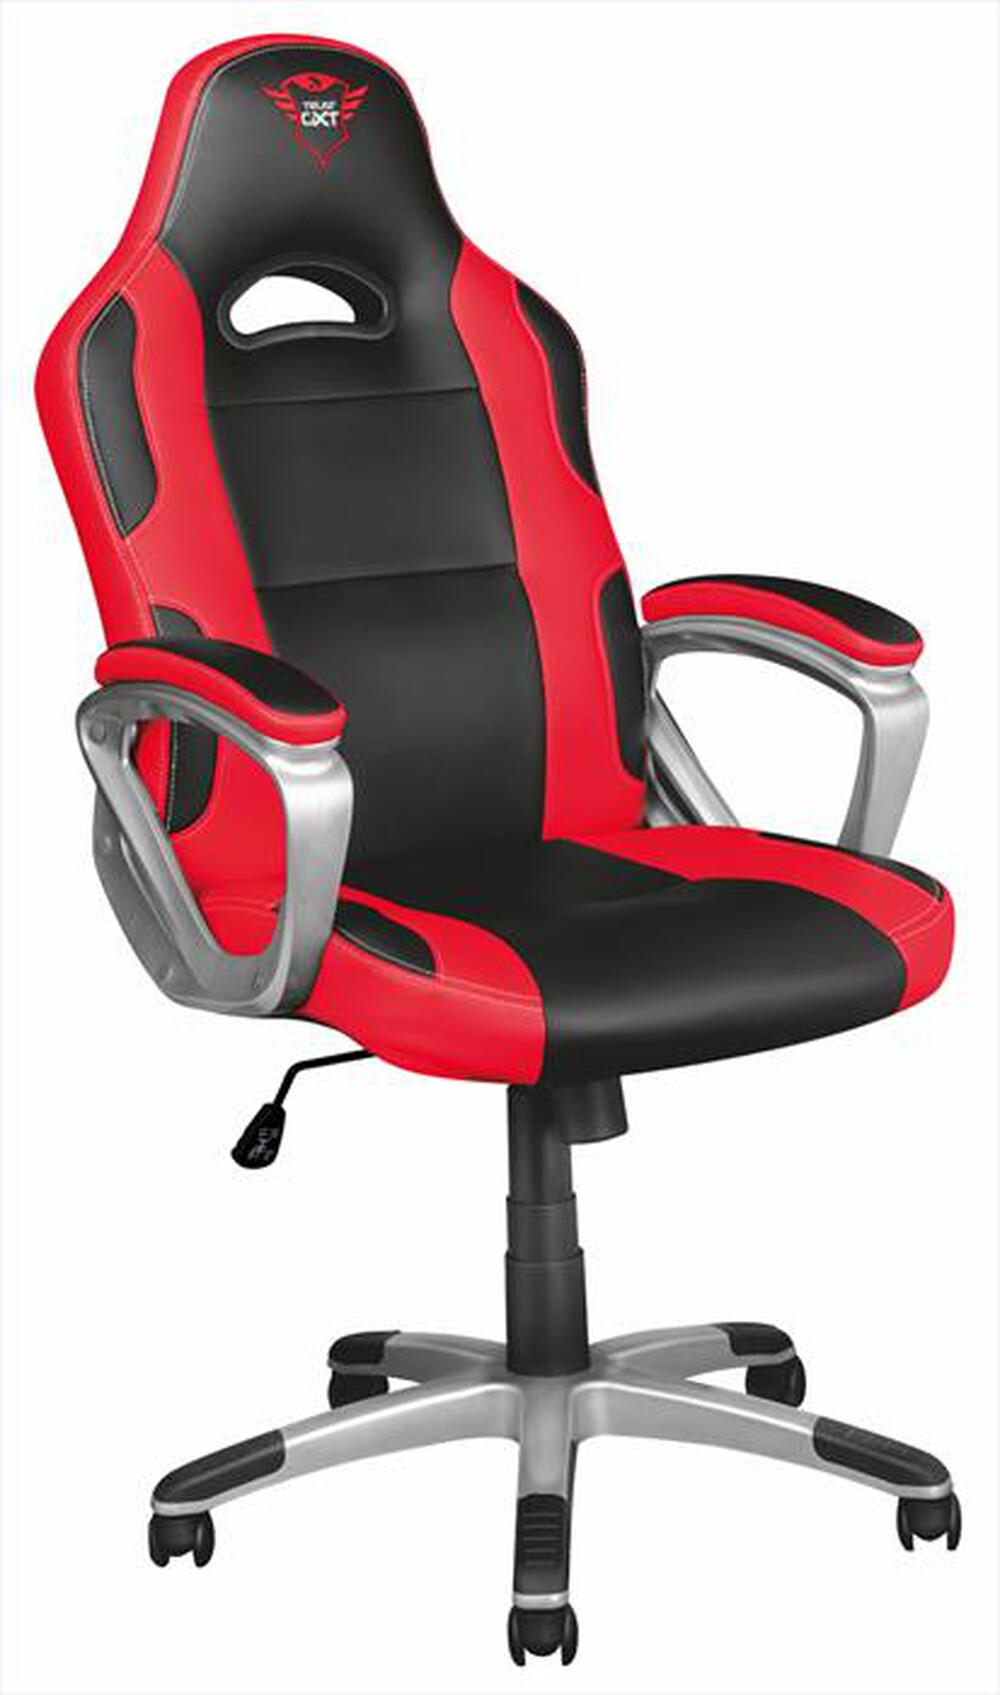 "TRUST - GXT705 RYON GAME CHAIR - Black/Red"